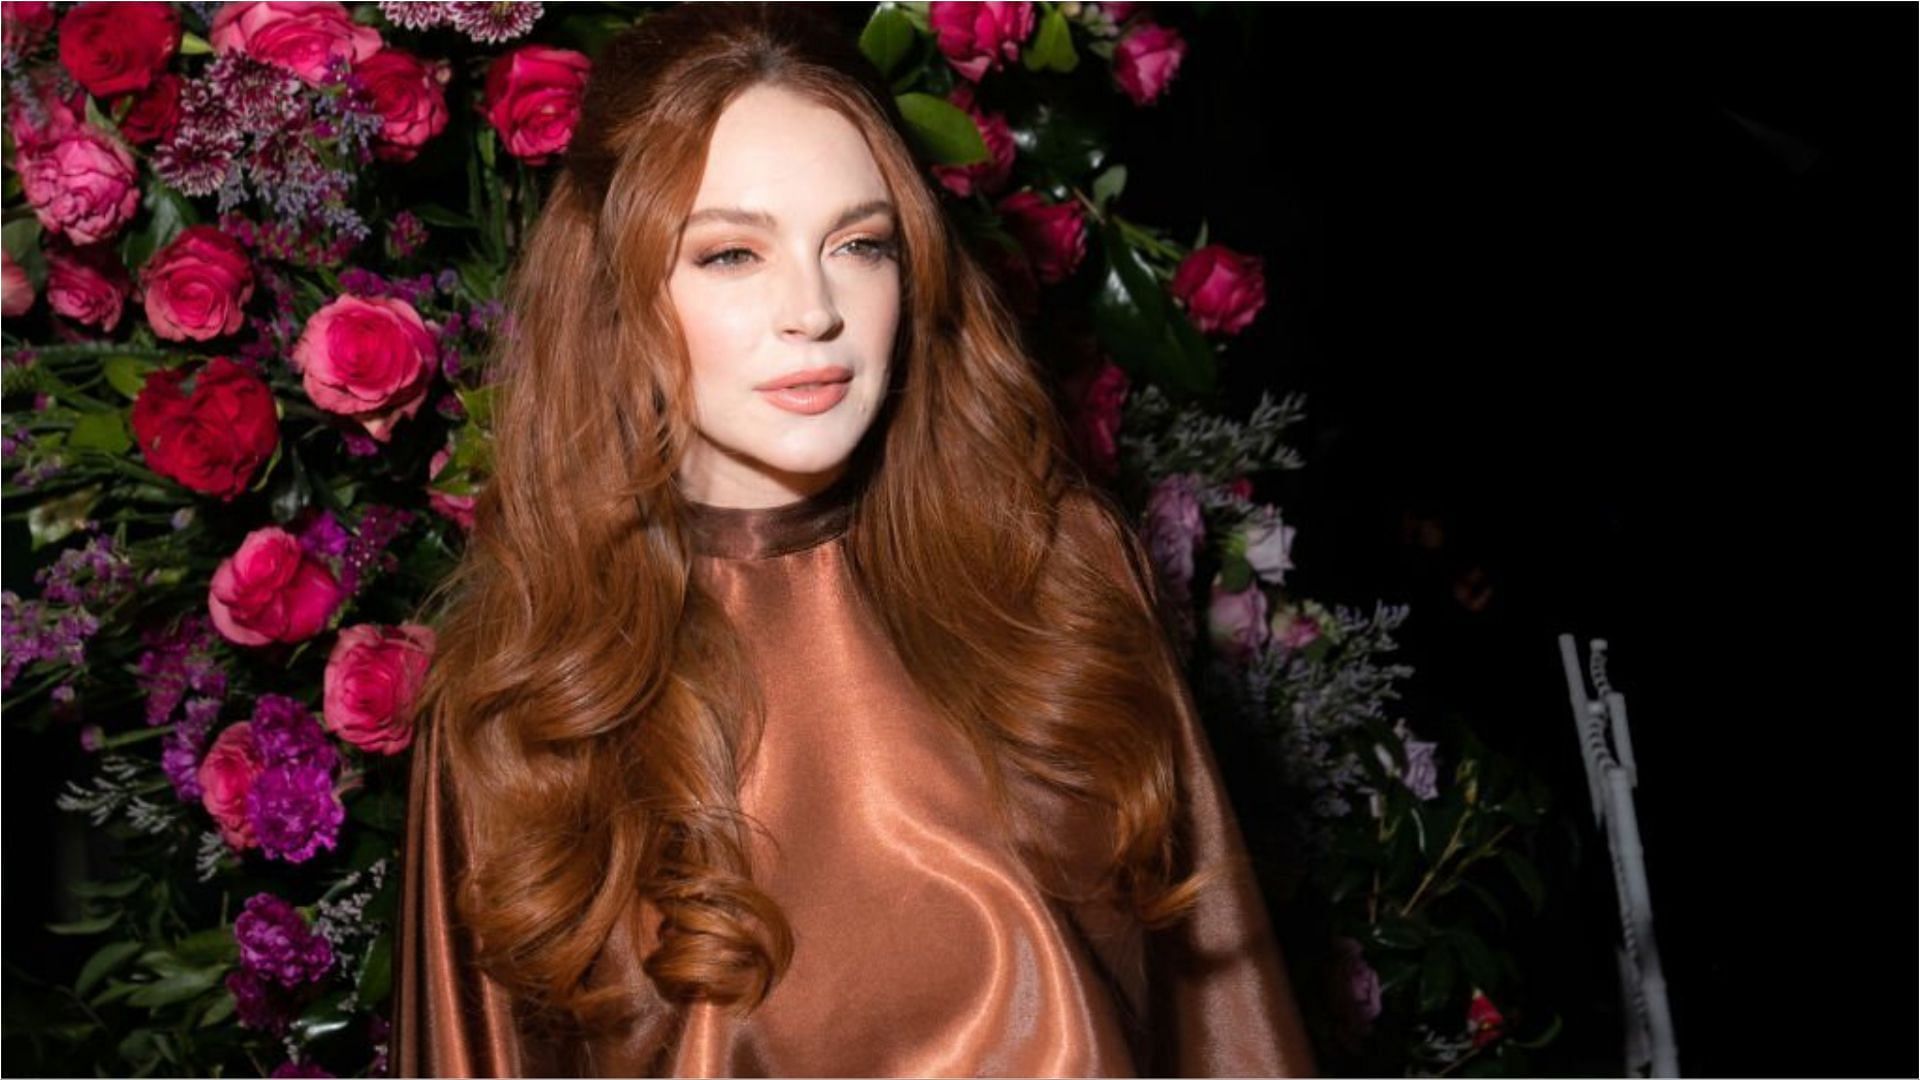 Lindsay Lohan disclosed about her pregnancy on Instagram (Image via Hippolyte Petit/Getty Images)